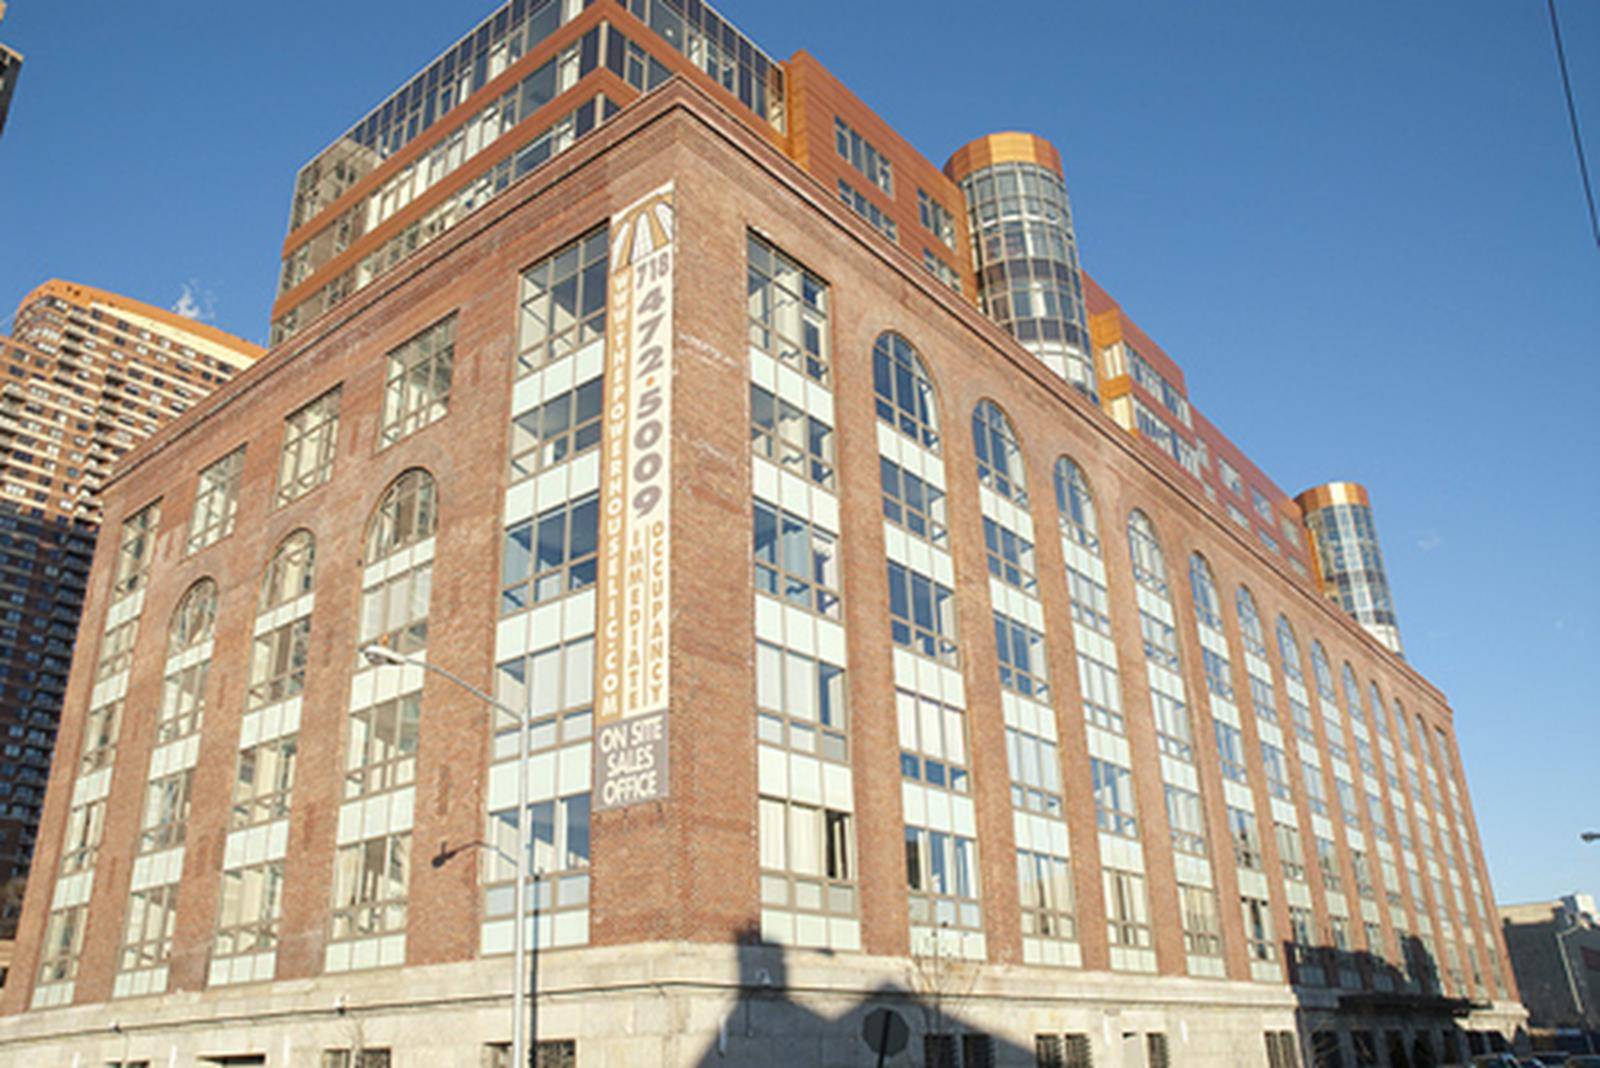 Must see ! 1001 sf loft apt convertible to a 2 bedroom and 2 full bath apartment in LIC's Power House.